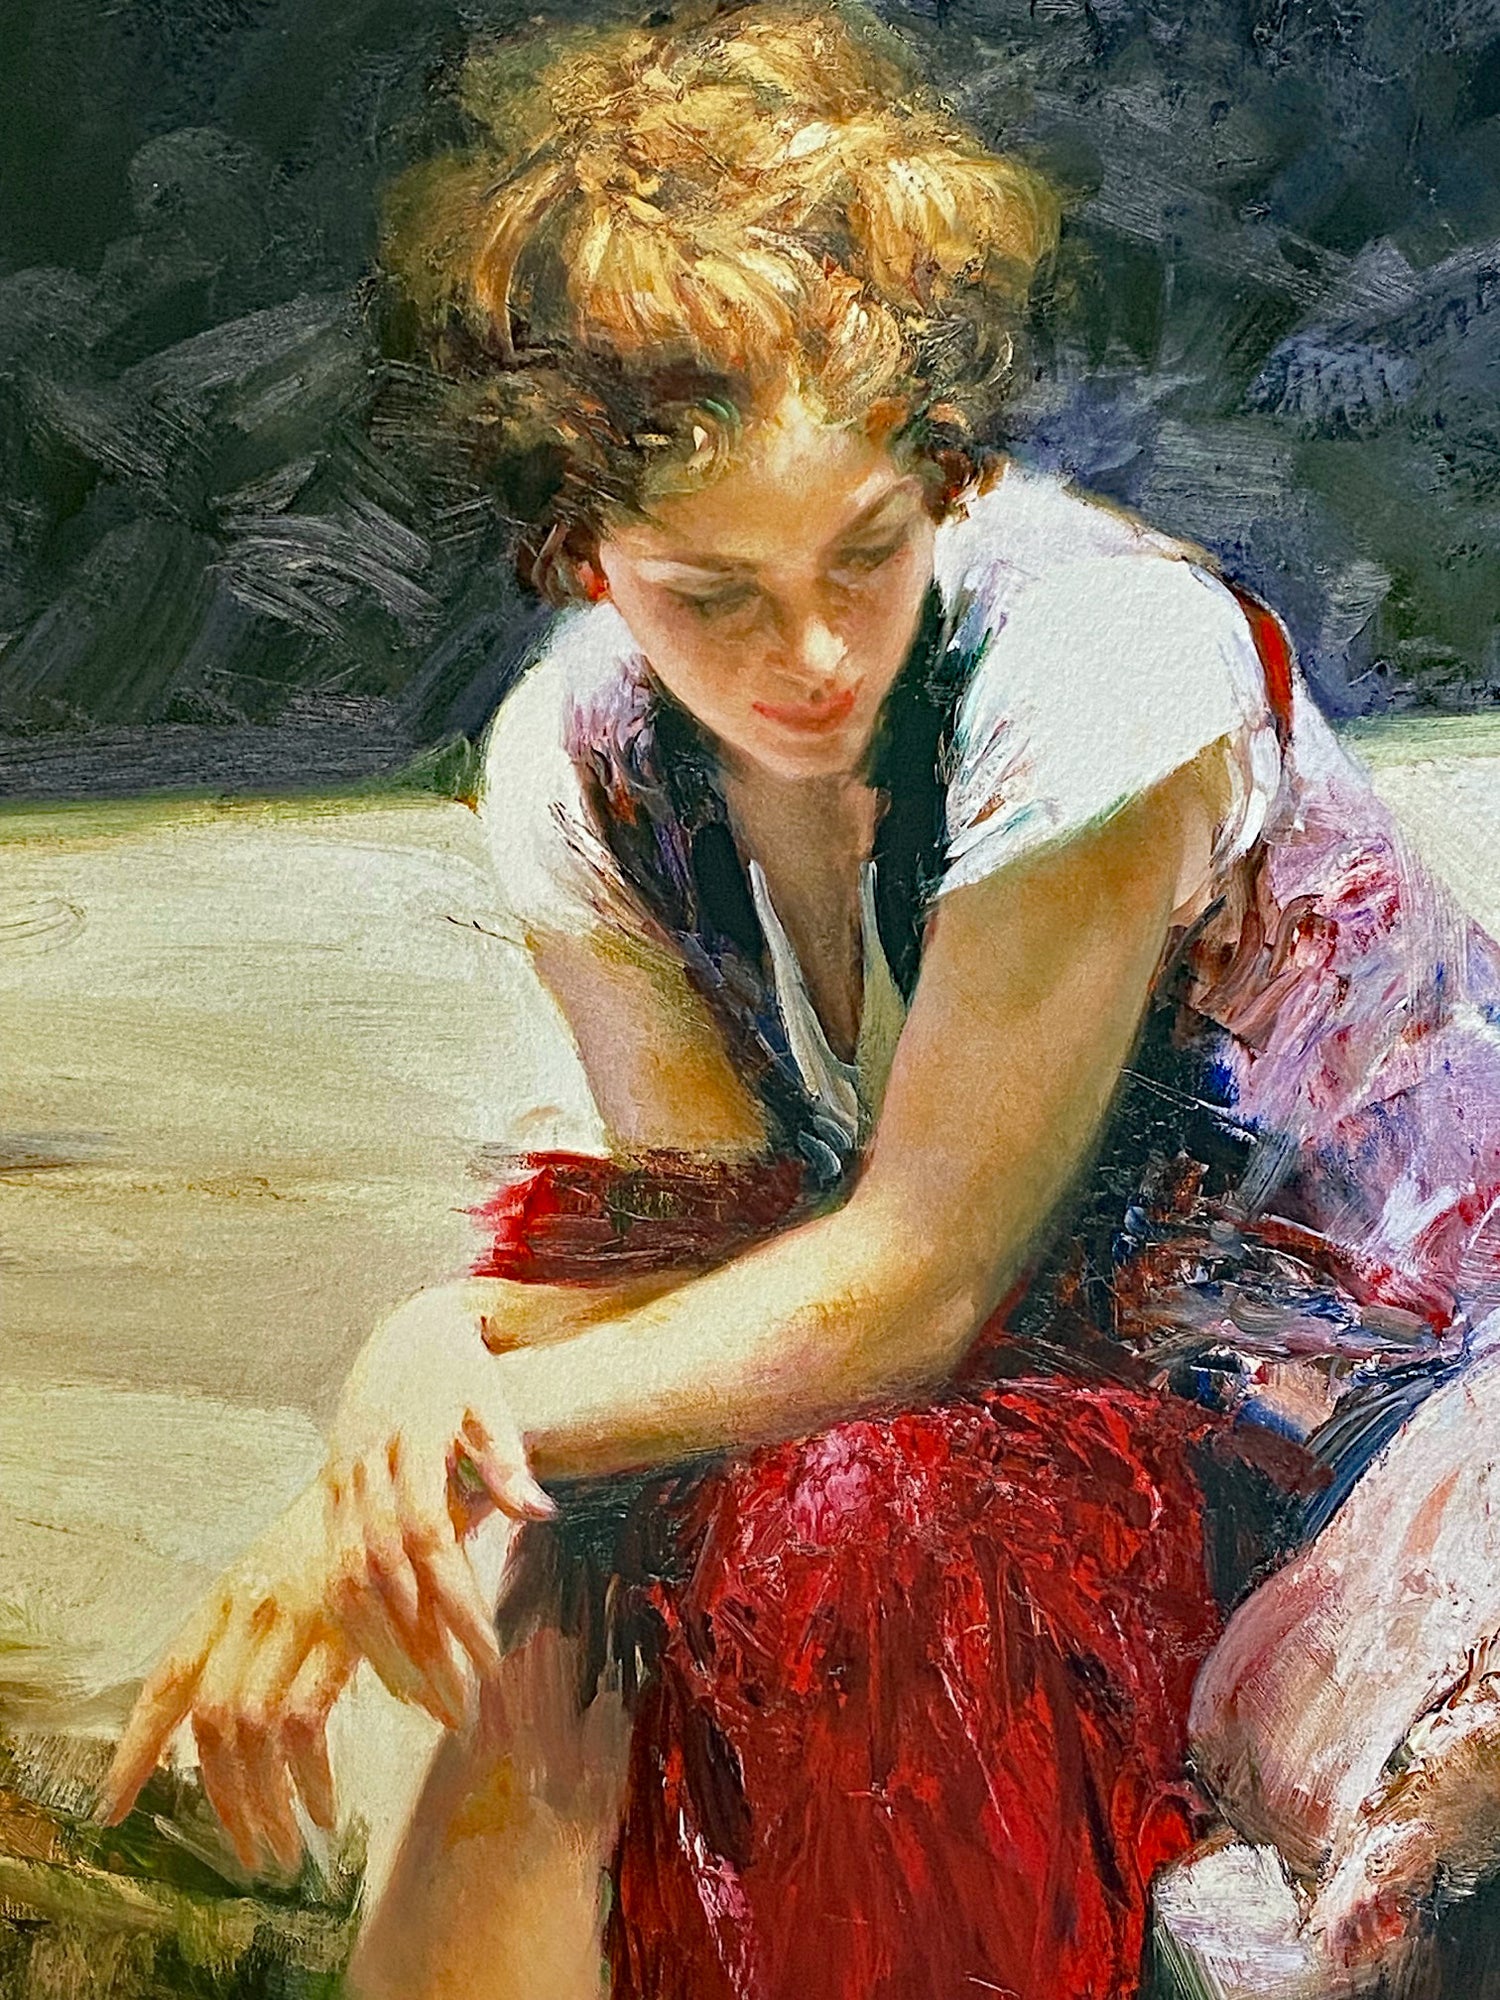 Whispering Heart - Limited Edition Giclée on Paper by Pino Daeni (1939-2010)